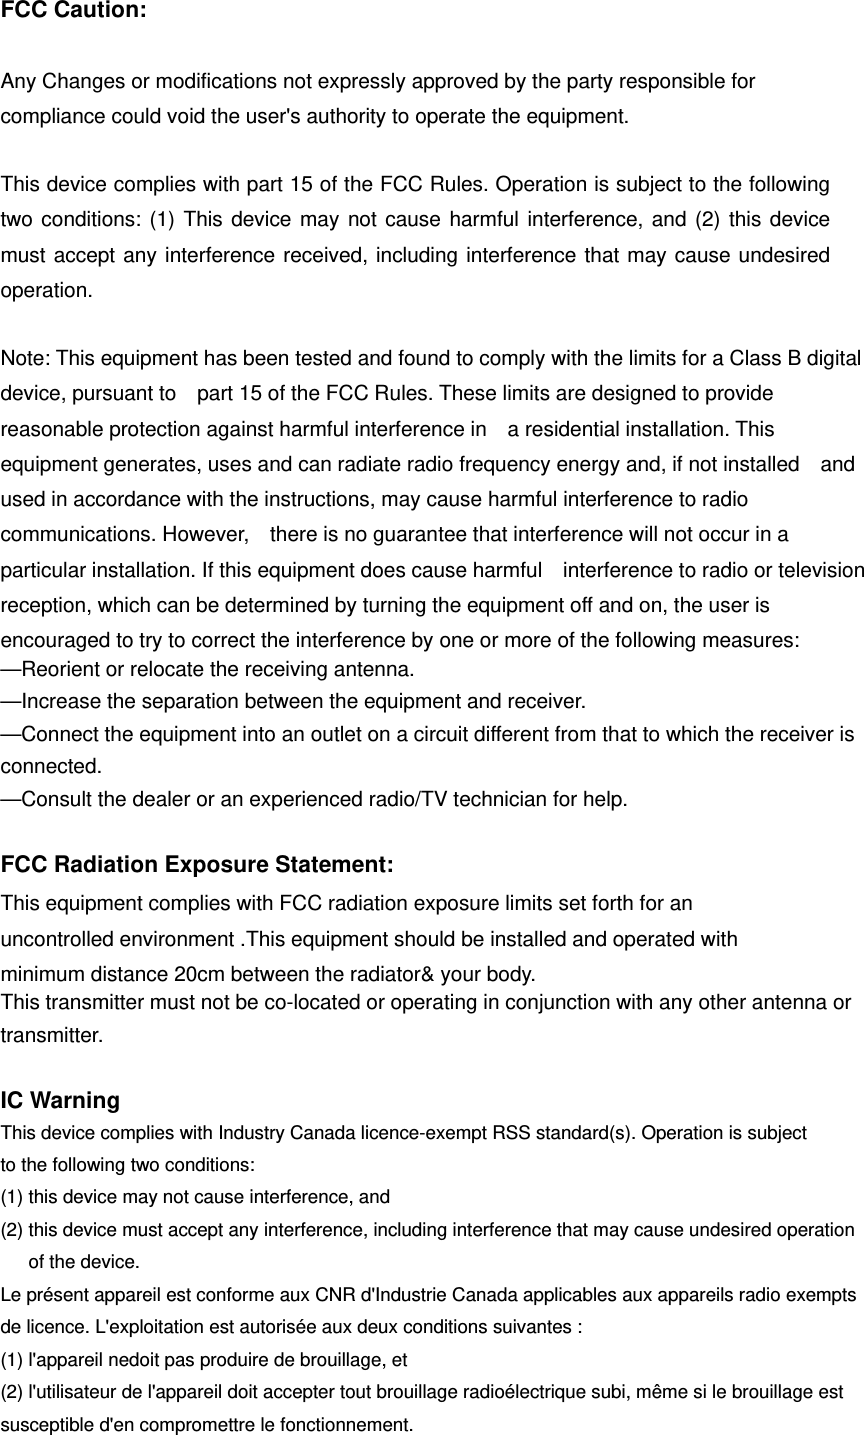 FCC Caution:  Any Changes or modifications not expressly approved by the party responsible for compliance could void the user&apos;s authority to operate the equipment.    This device complies with part 15 of the FCC Rules. Operation is subject to the following two conditions: (1) This device may not cause harmful interference, and (2) this device must accept any interference received, including interference that may cause undesired operation.    Note: This equipment has been tested and found to comply with the limits for a Class B digital device, pursuant to    part 15 of the FCC Rules. These limits are designed to provide reasonable protection against harmful interference in    a residential installation. This equipment generates, uses and can radiate radio frequency energy and, if not installed    and used in accordance with the instructions, may cause harmful interference to radio communications. However,    there is no guarantee that interference will not occur in a particular installation. If this equipment does cause harmful    interference to radio or television reception, which can be determined by turning the equipment off and on, the user is   encouraged to try to correct the interference by one or more of the following measures:     —Reorient or relocate the receiving antenna.     —Increase the separation between the equipment and receiver.     —Connect the equipment into an outlet on a circuit different from that to which the receiver is connected.   —Consult the dealer or an experienced radio/TV technician for help.  FCC Radiation Exposure Statement:     This equipment complies with FCC radiation exposure limits set forth for an uncontrolled environment .This equipment should be installed and operated with minimum distance 20cm between the radiator&amp; your body.     This transmitter must not be co-located or operating in conjunction with any other antenna or transmitter.  IC Warning This device complies with Industry Canada licence-exempt RSS standard(s). Operation is subject to the following two conditions:   (1) this device may not cause interference, and (2) this device must accept any interference, including interference that may cause undesired operation of the device. Le présent appareil est conforme aux CNR d&apos;Industrie Canada applicables aux appareils radio exempts de licence. L&apos;exploitation est autorisée aux deux conditions suivantes : (1) l&apos;appareil nedoit pas produire de brouillage, et (2) l&apos;utilisateur de l&apos;appareil doit accepter tout brouillage radioélectrique subi, même si le brouillage est susceptible d&apos;en compromettre le fonctionnement. 